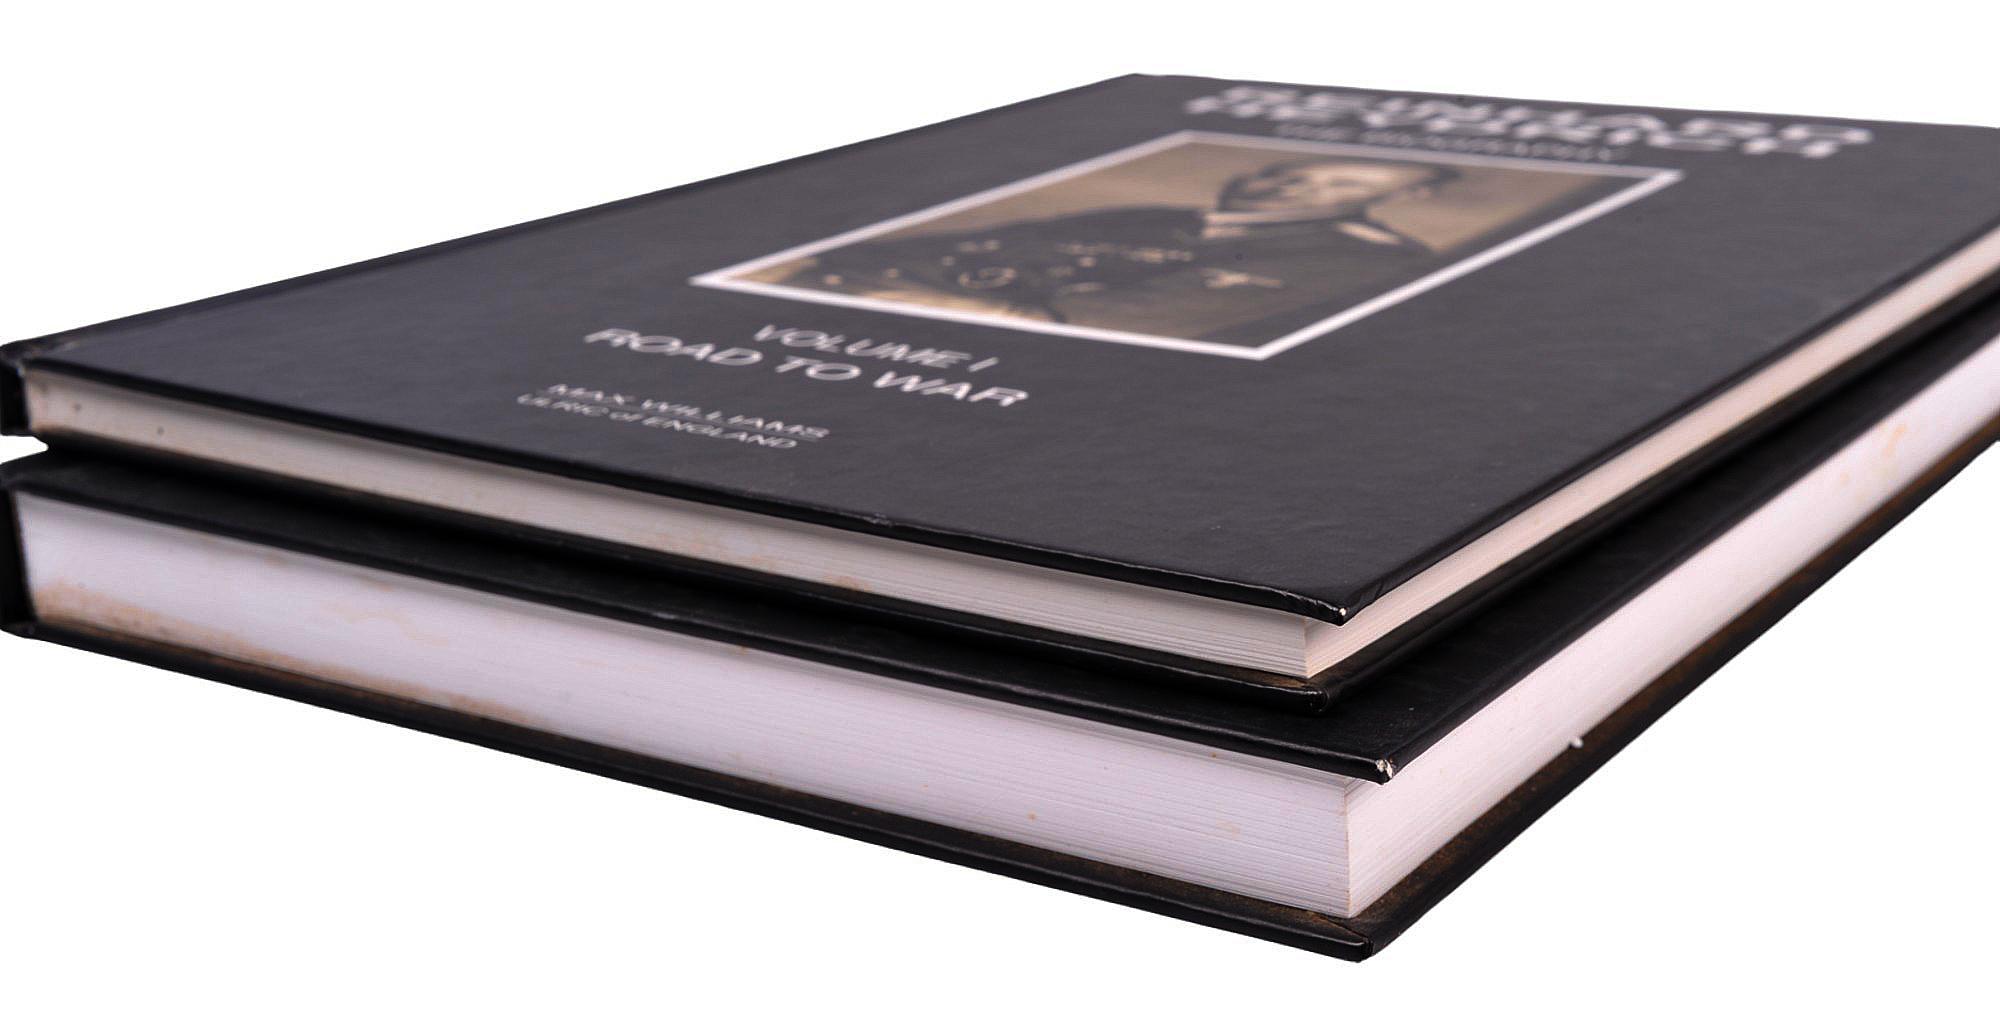 Two Collector Reference Books on Reinhart Heydrich (ARD)